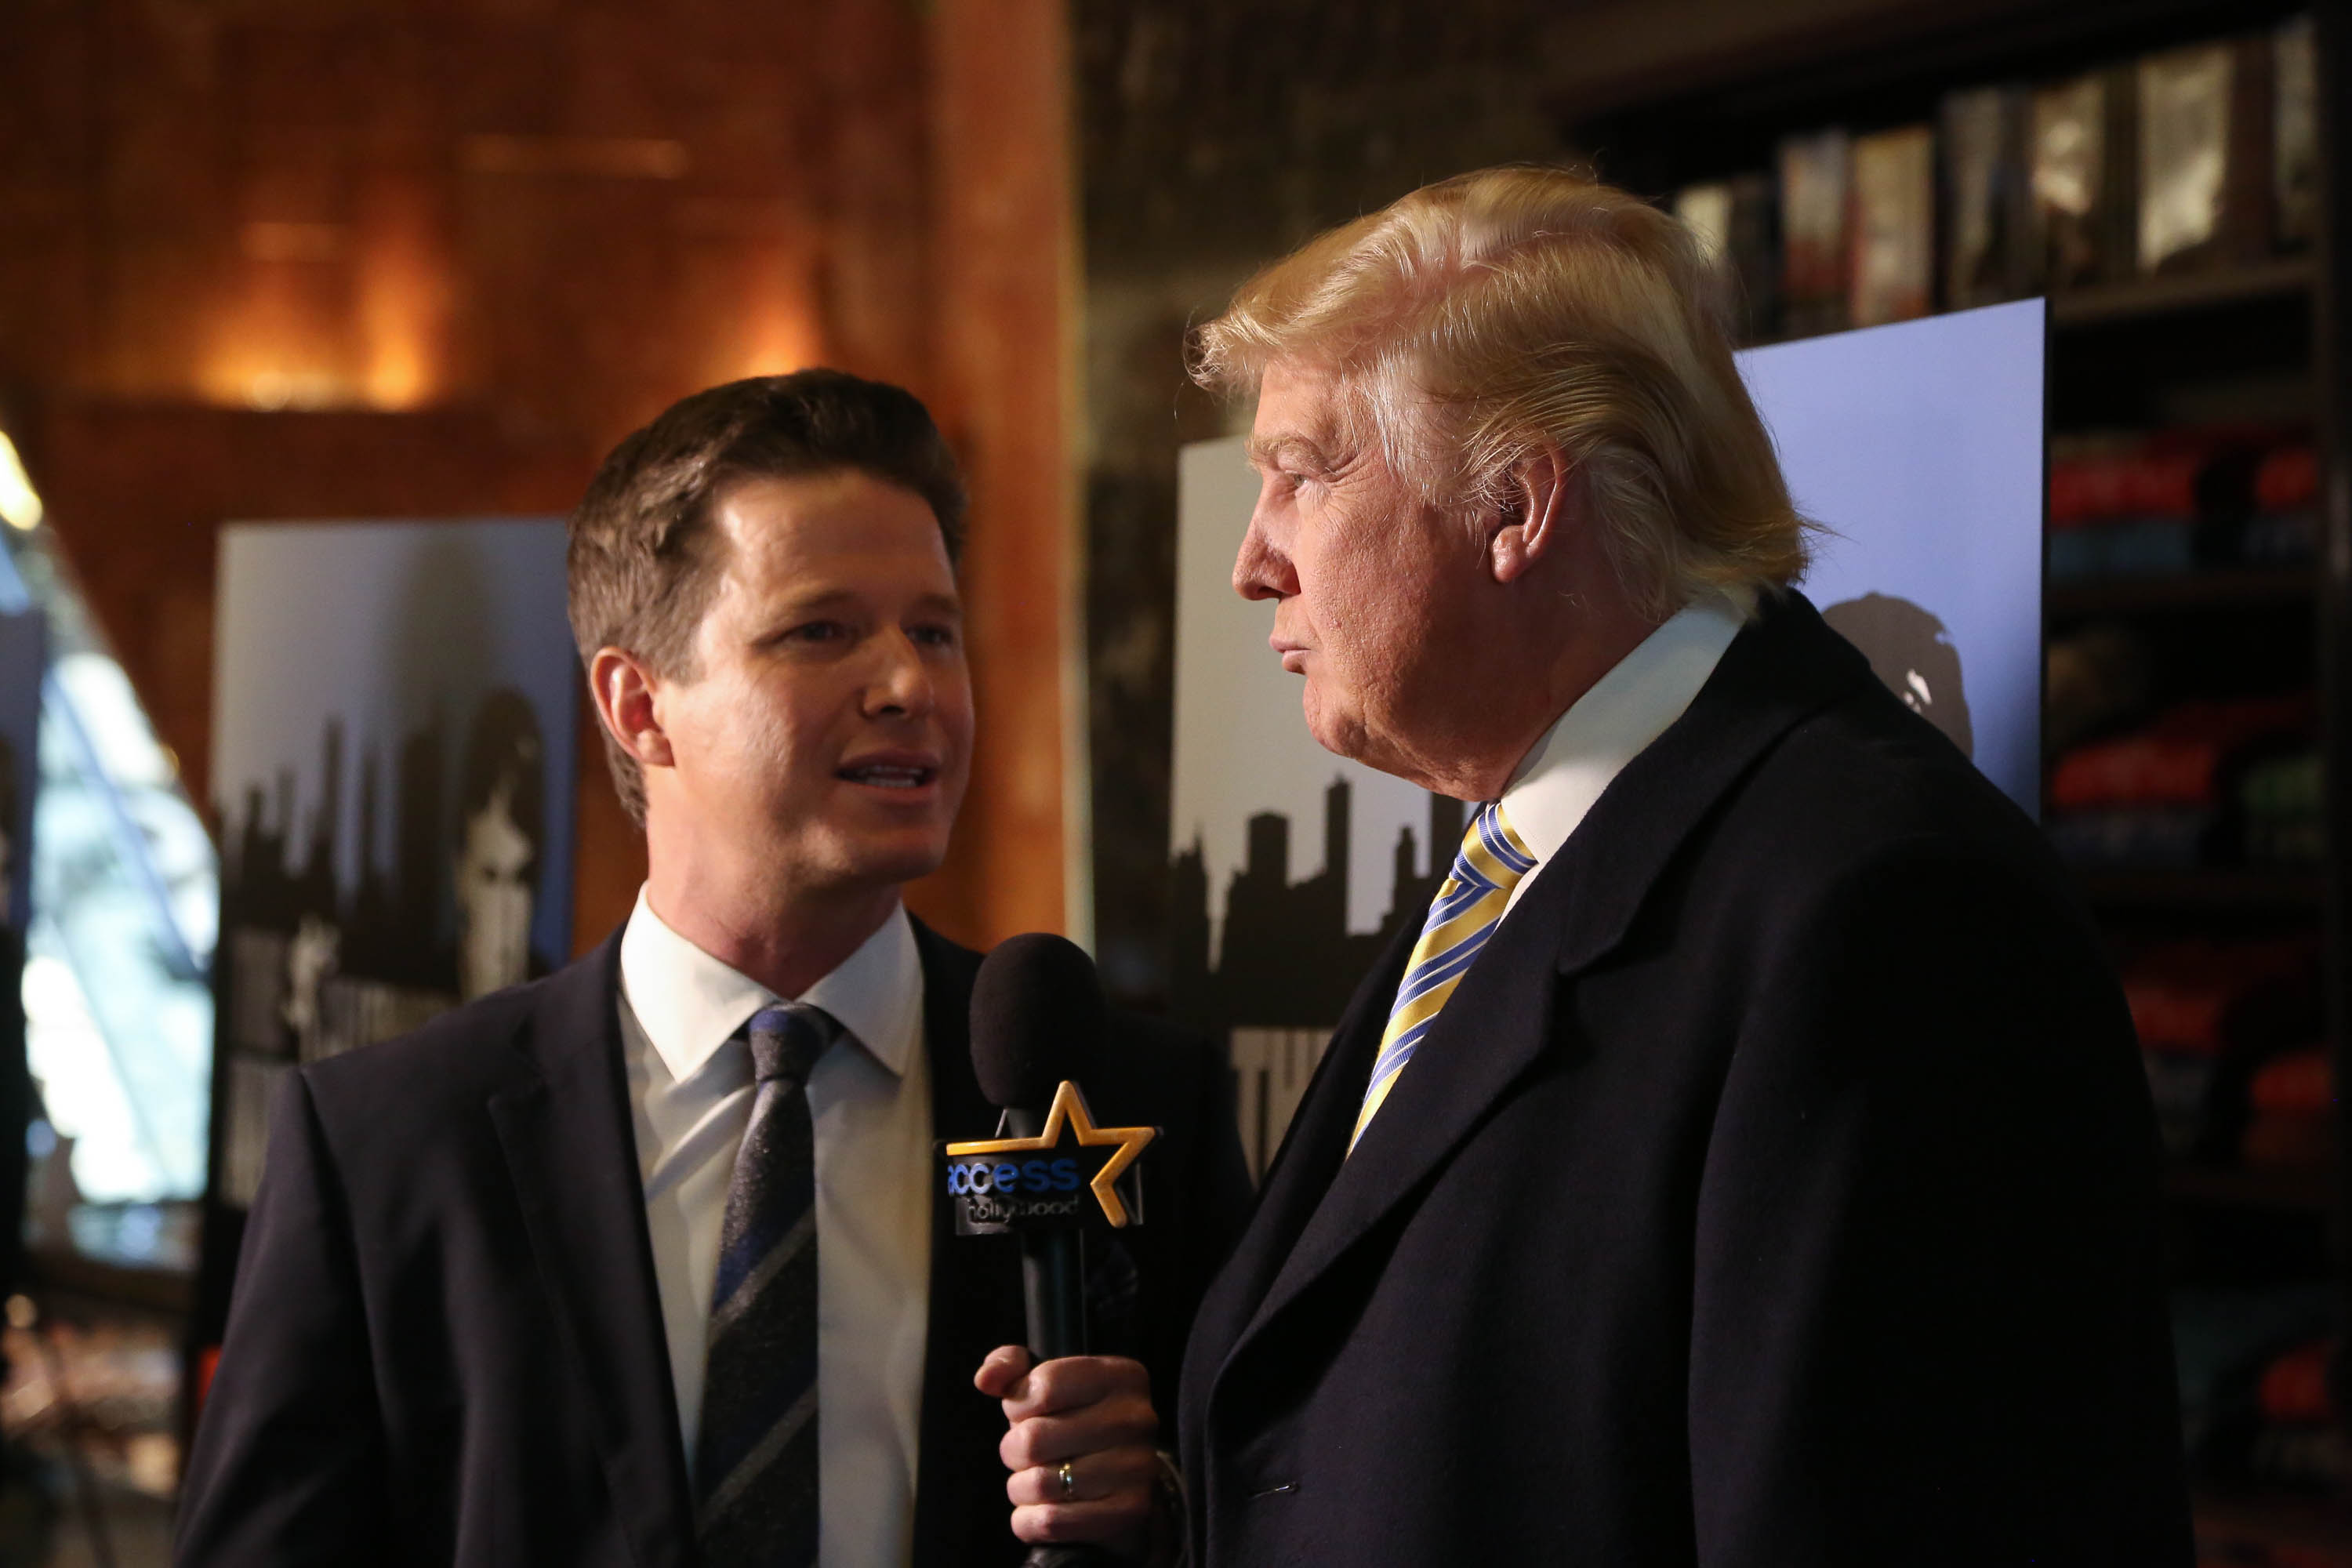 Donald Trump (R) is interviewed by Billy Bush of Access Hollywood at "Celebrity Apprentice" Red Carpet Event at Trump Tower on Jan. 20, 2015 in New York City. (Rob Kim/Getty Images)